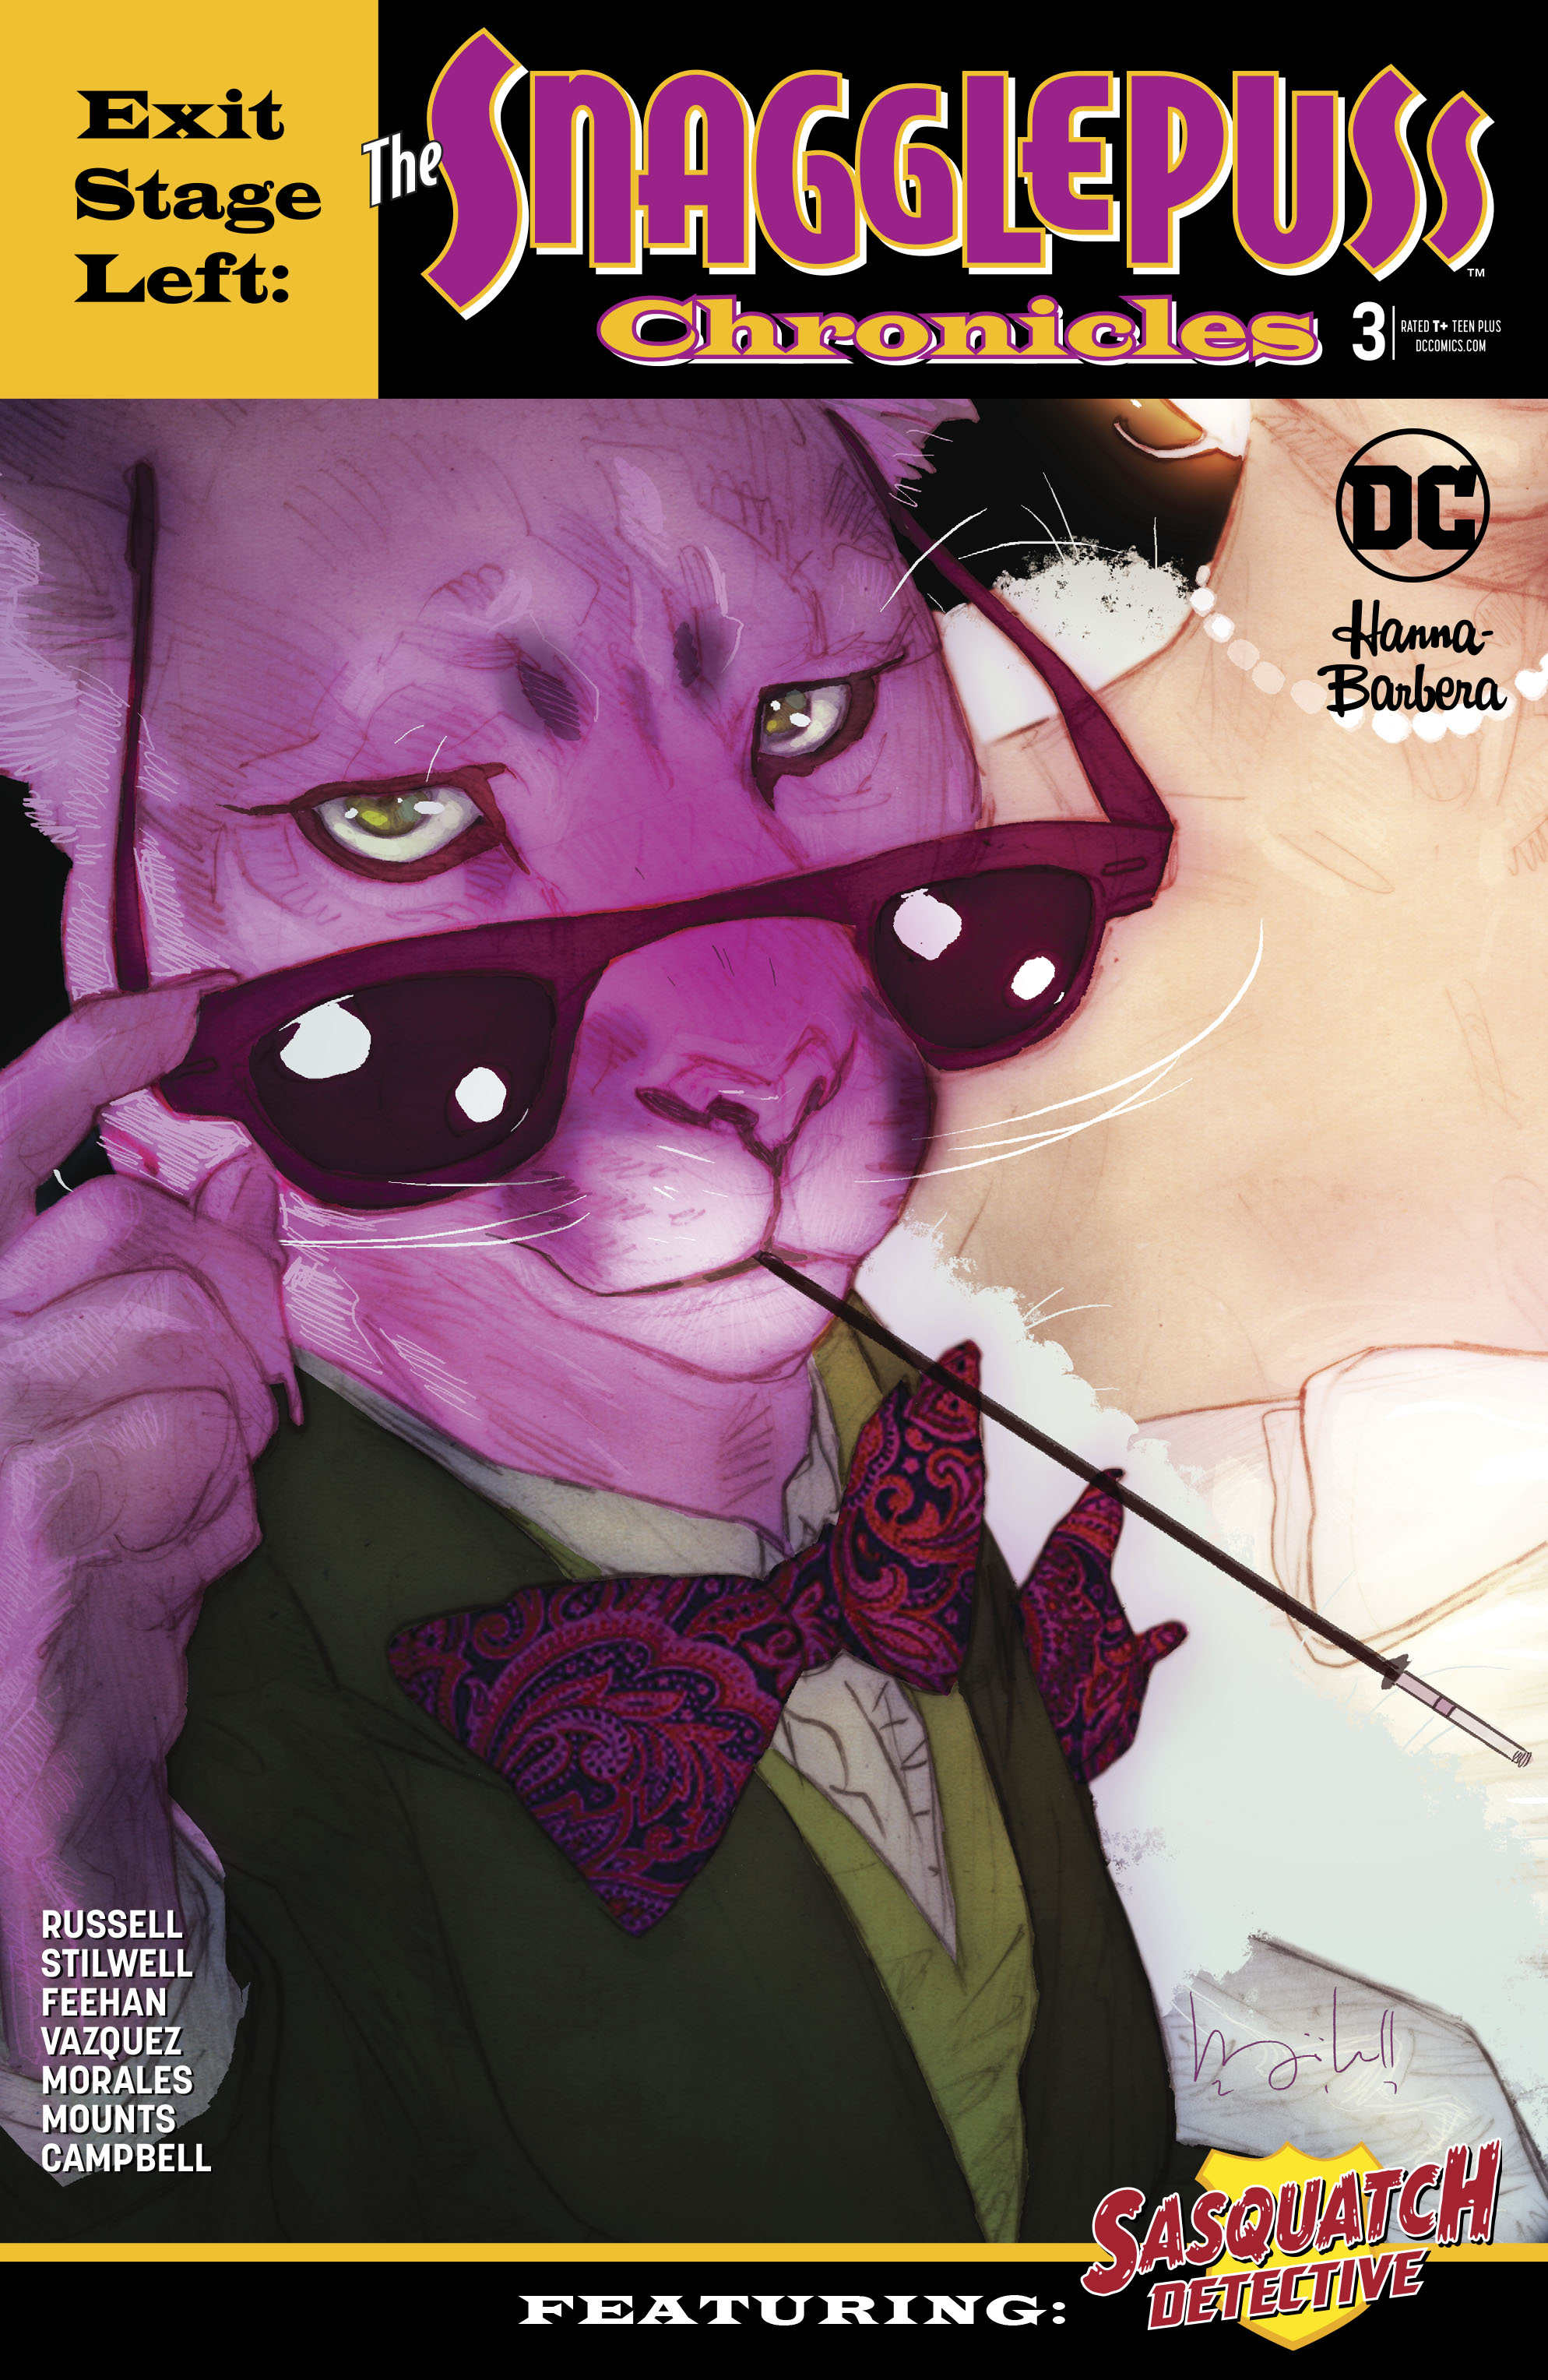 EXIT STAGE LEFT THE SNAGGLEPUSS CHRONICLES #3 (OF 6)